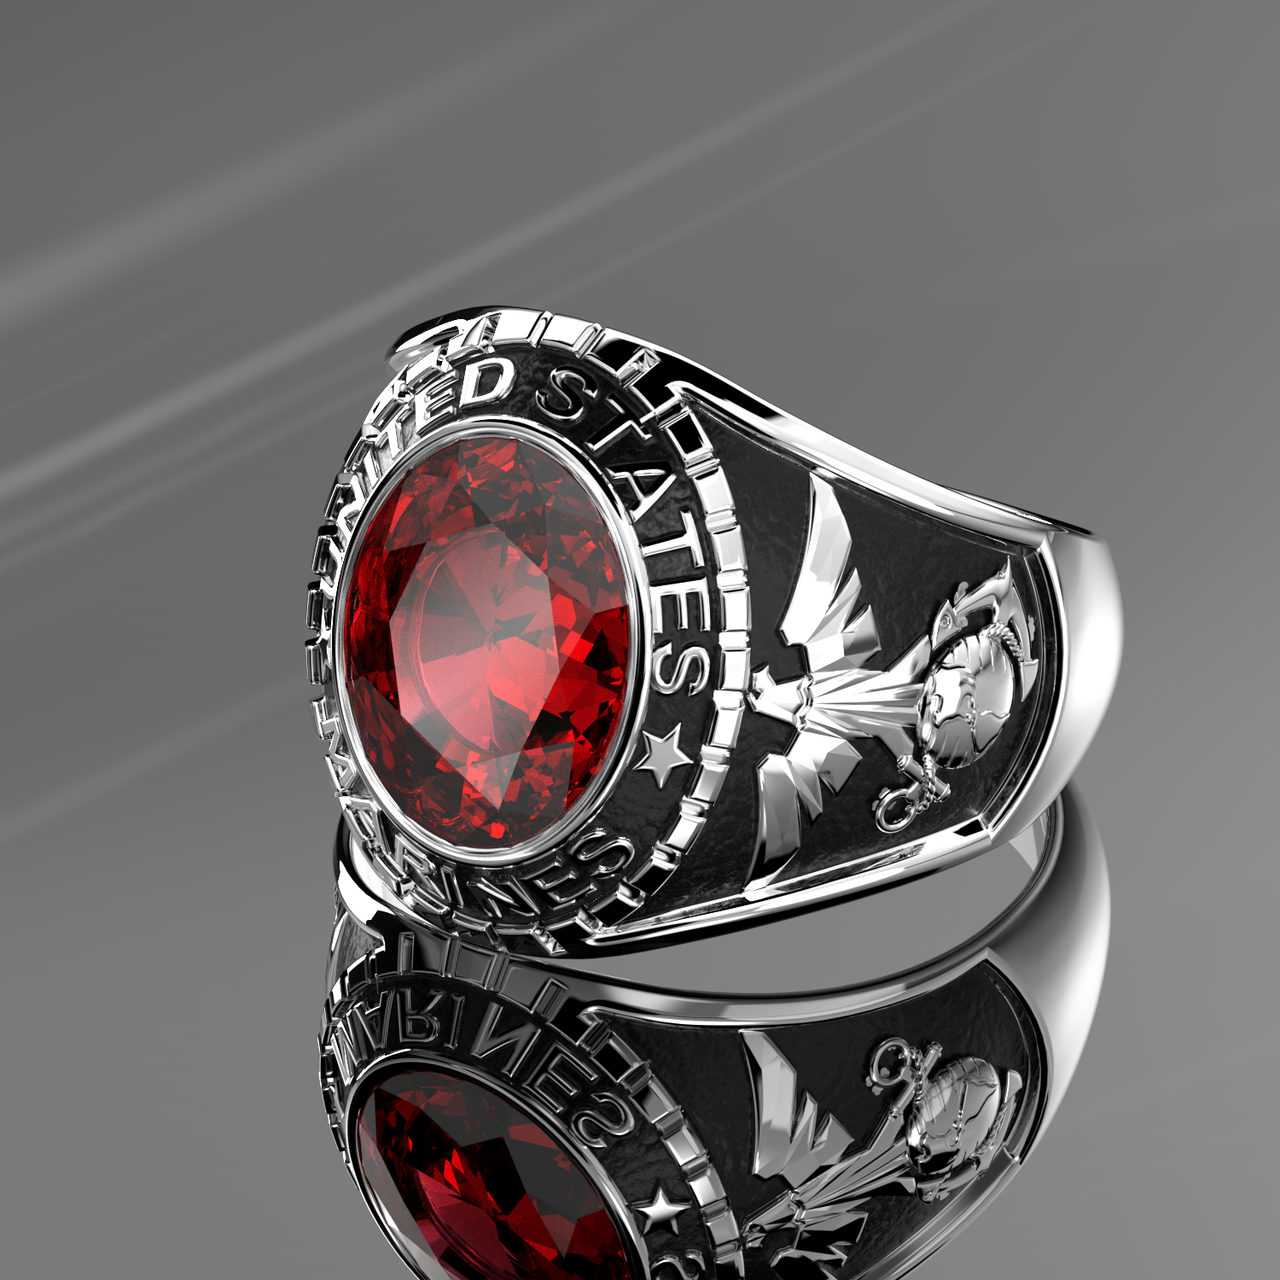 Customizable Men's 925 Sterling Silver US Marine Corps Military Solid Back Ring